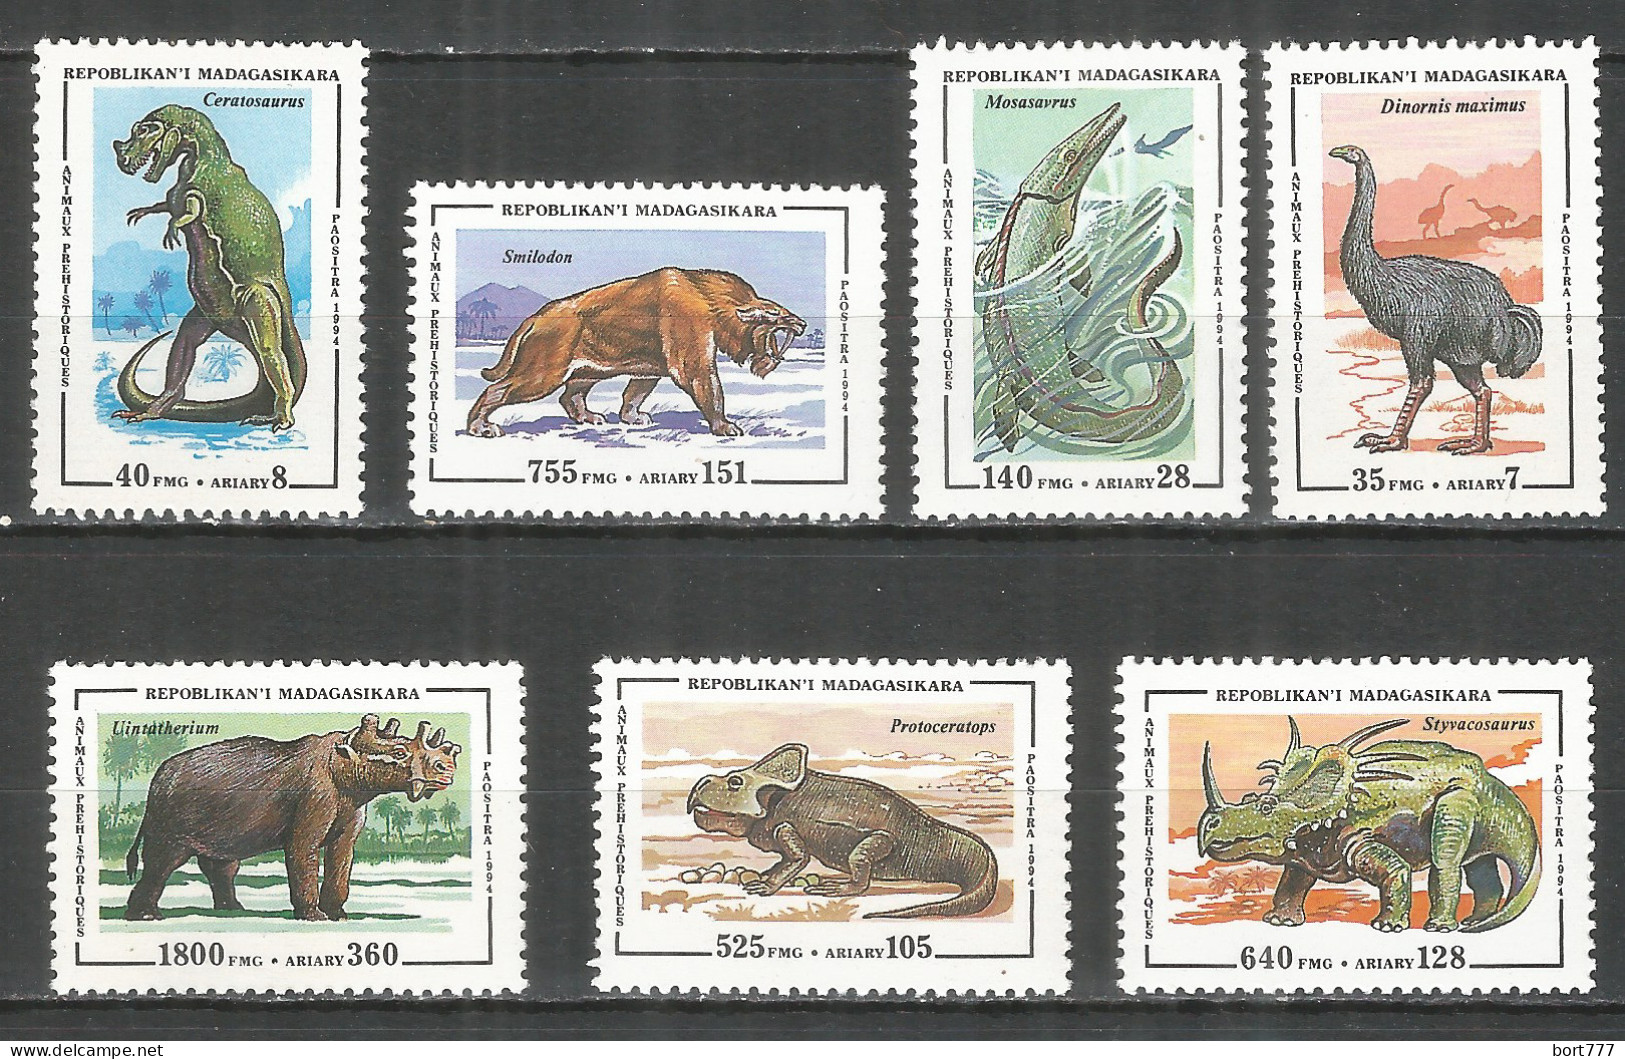 Malagasy Madagascar 1993 Year , Mint Stamps MNH - Reptile Animals - Madagascar (1960-...)